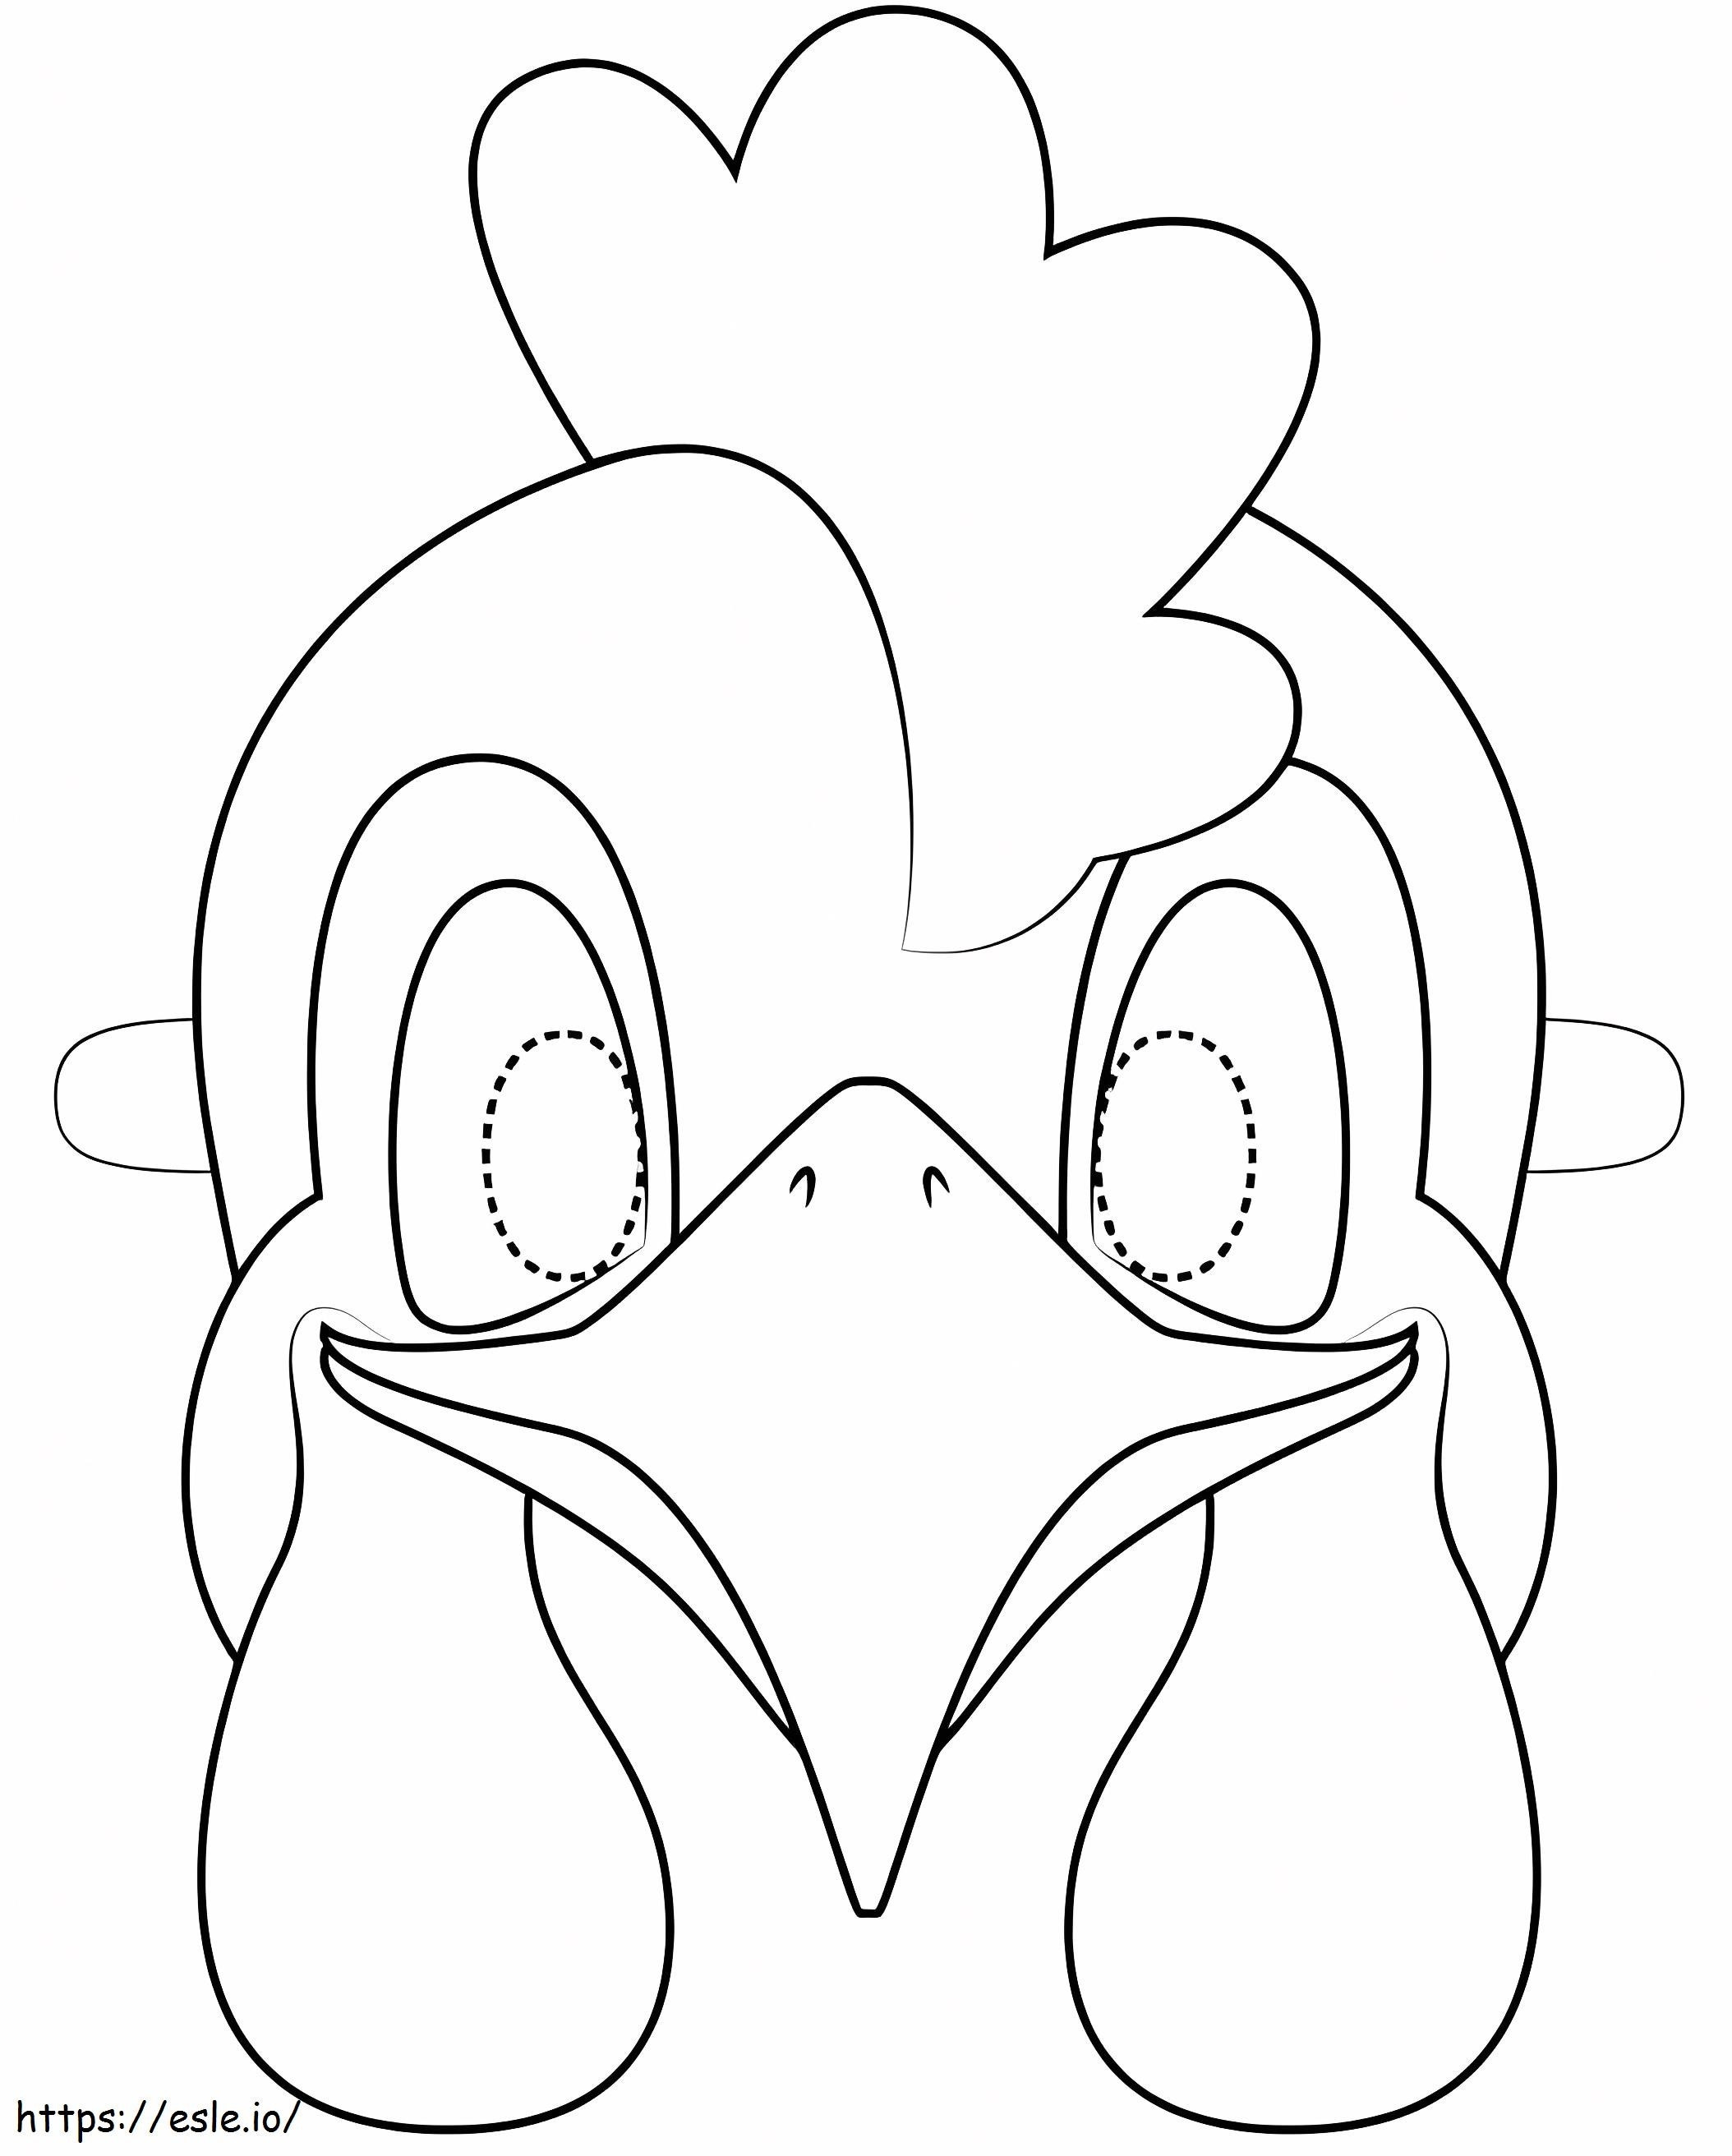 Rooster Mask coloring page